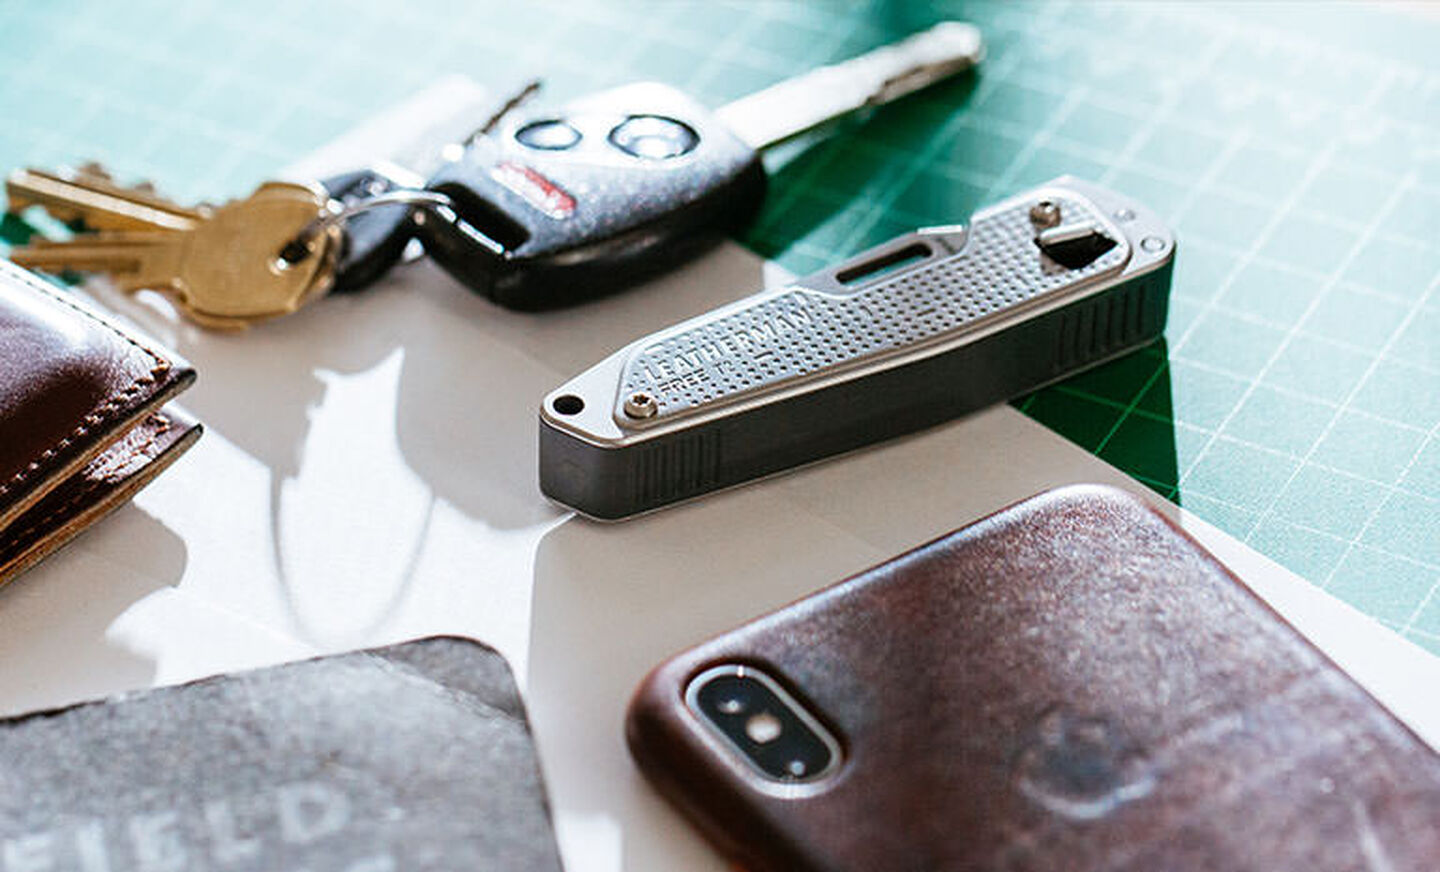 Brown Leatherman Wallet, car keys, Leatherman T2, gray note pad, and Iphone on top of white piece of paper placed on green grid table